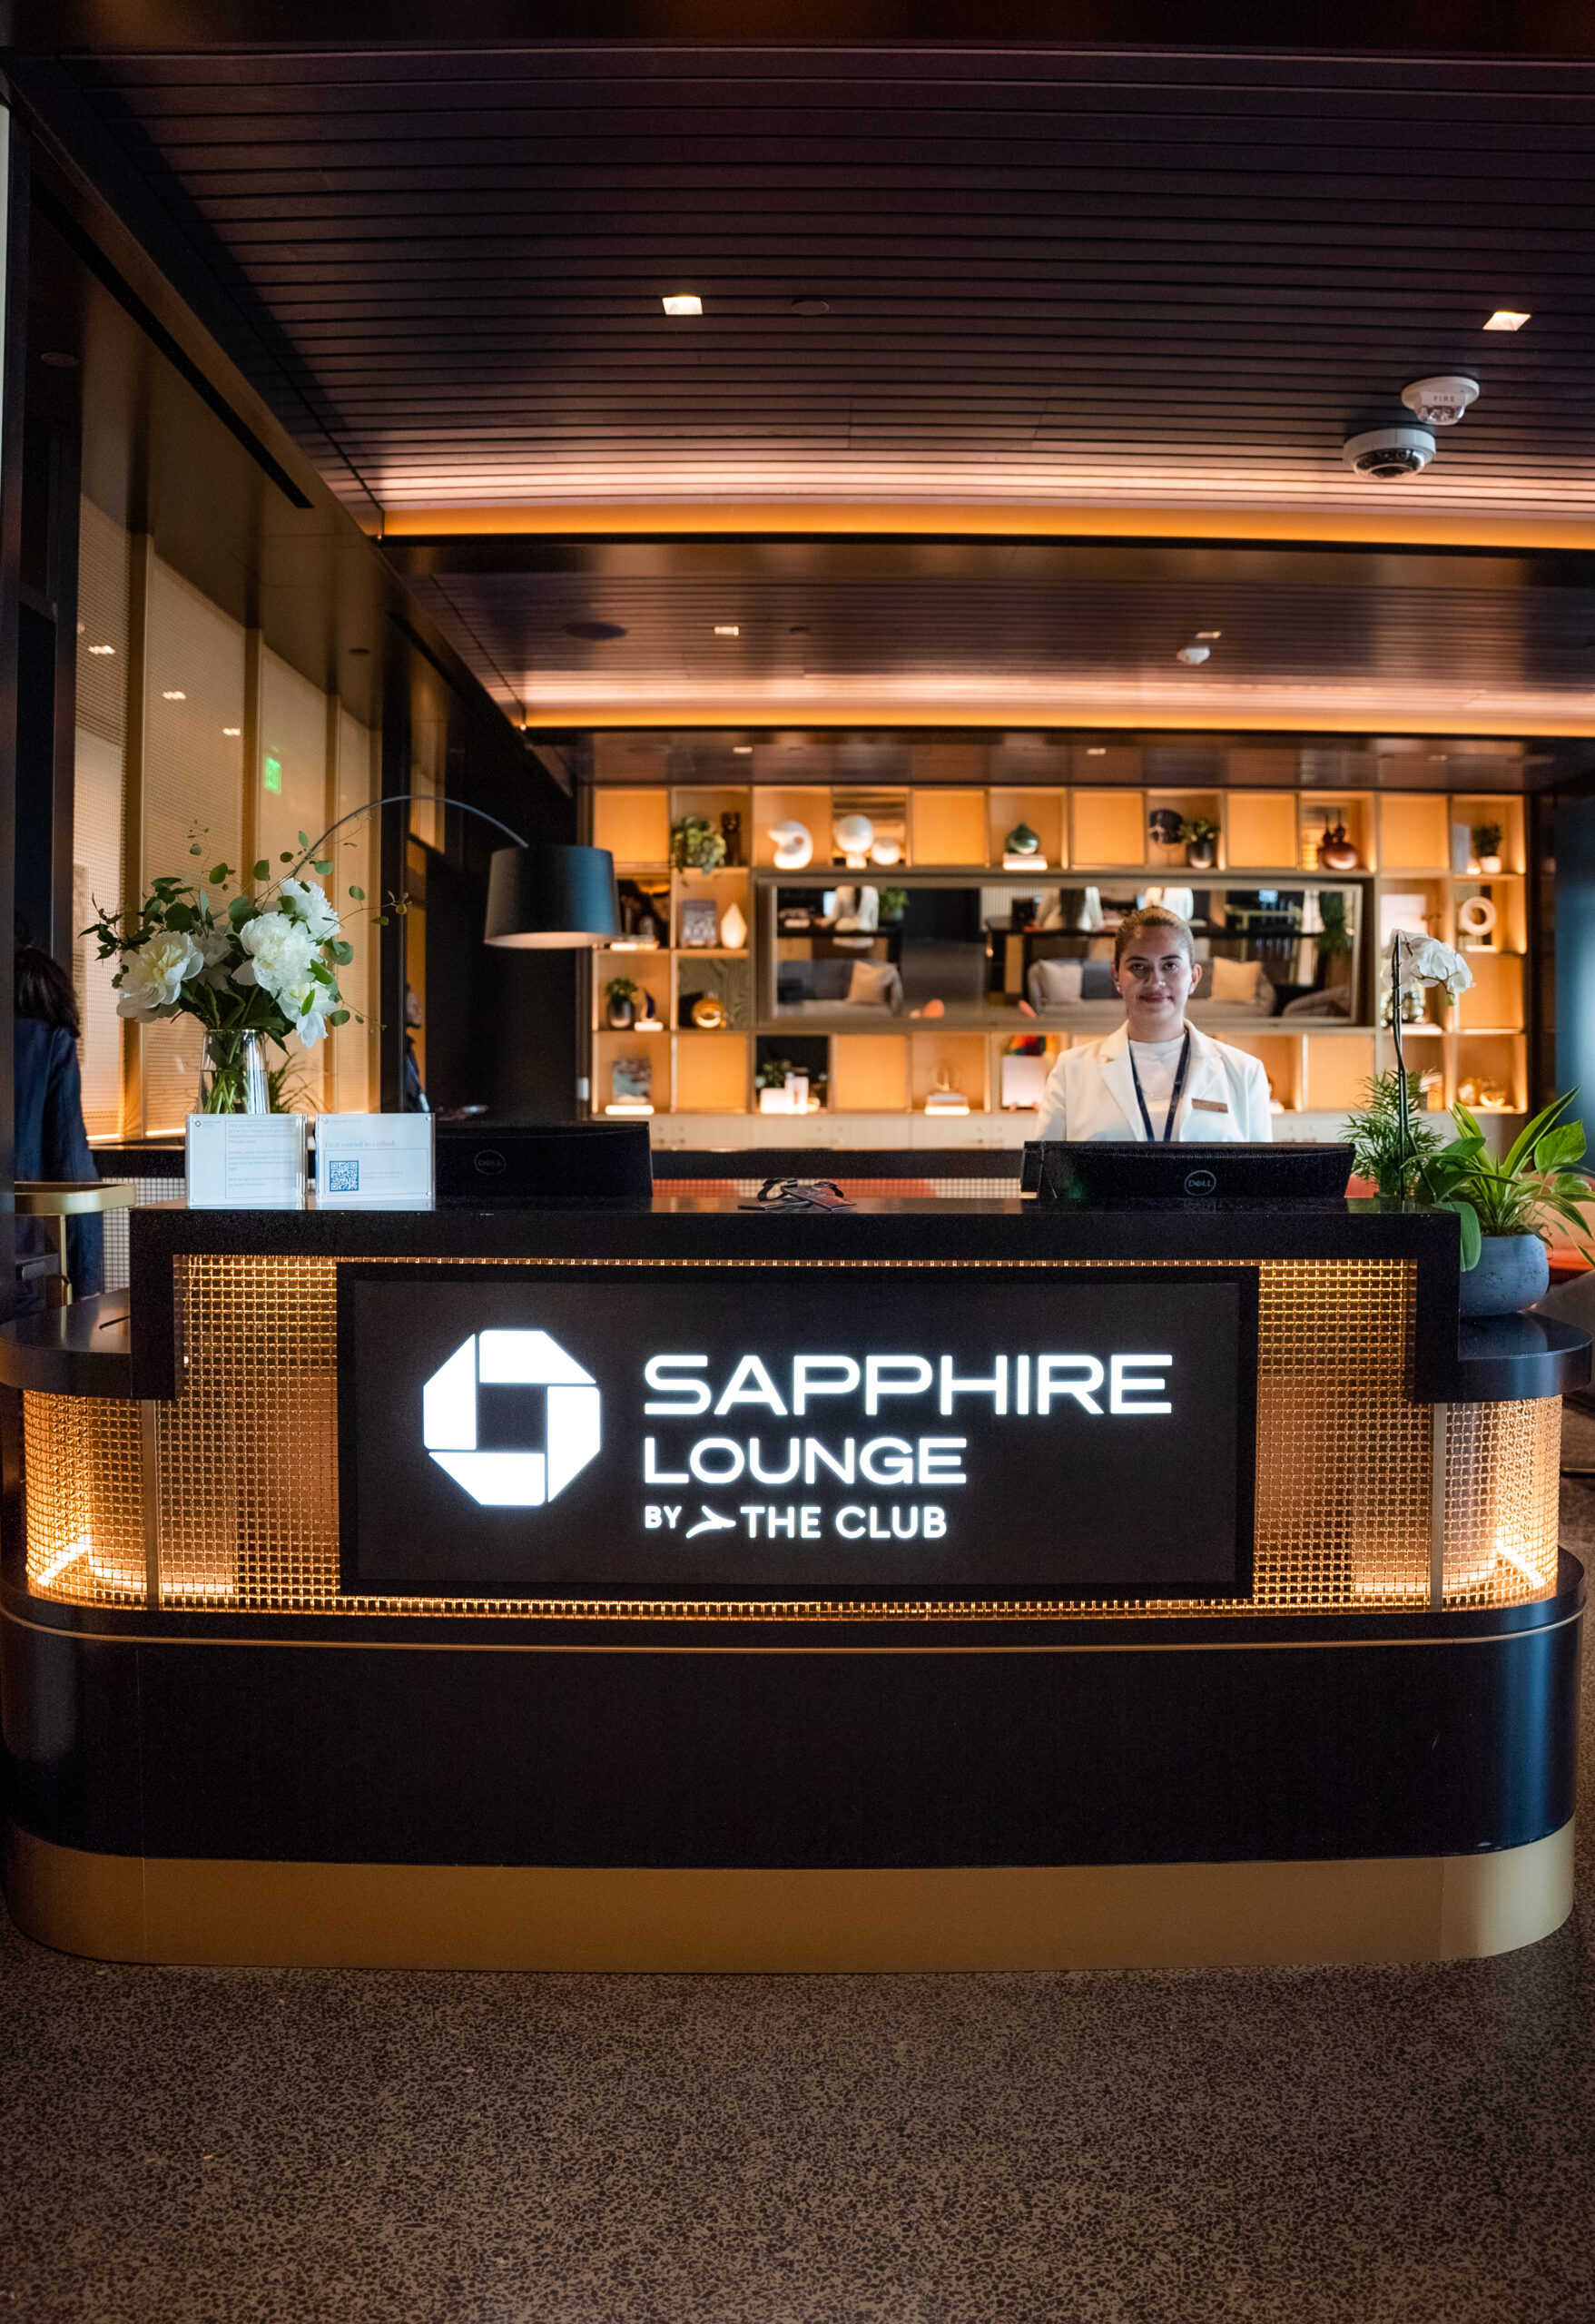 First Look: Chase Sets the Bar High with Its First Sapphire Lounge in Boston Airport